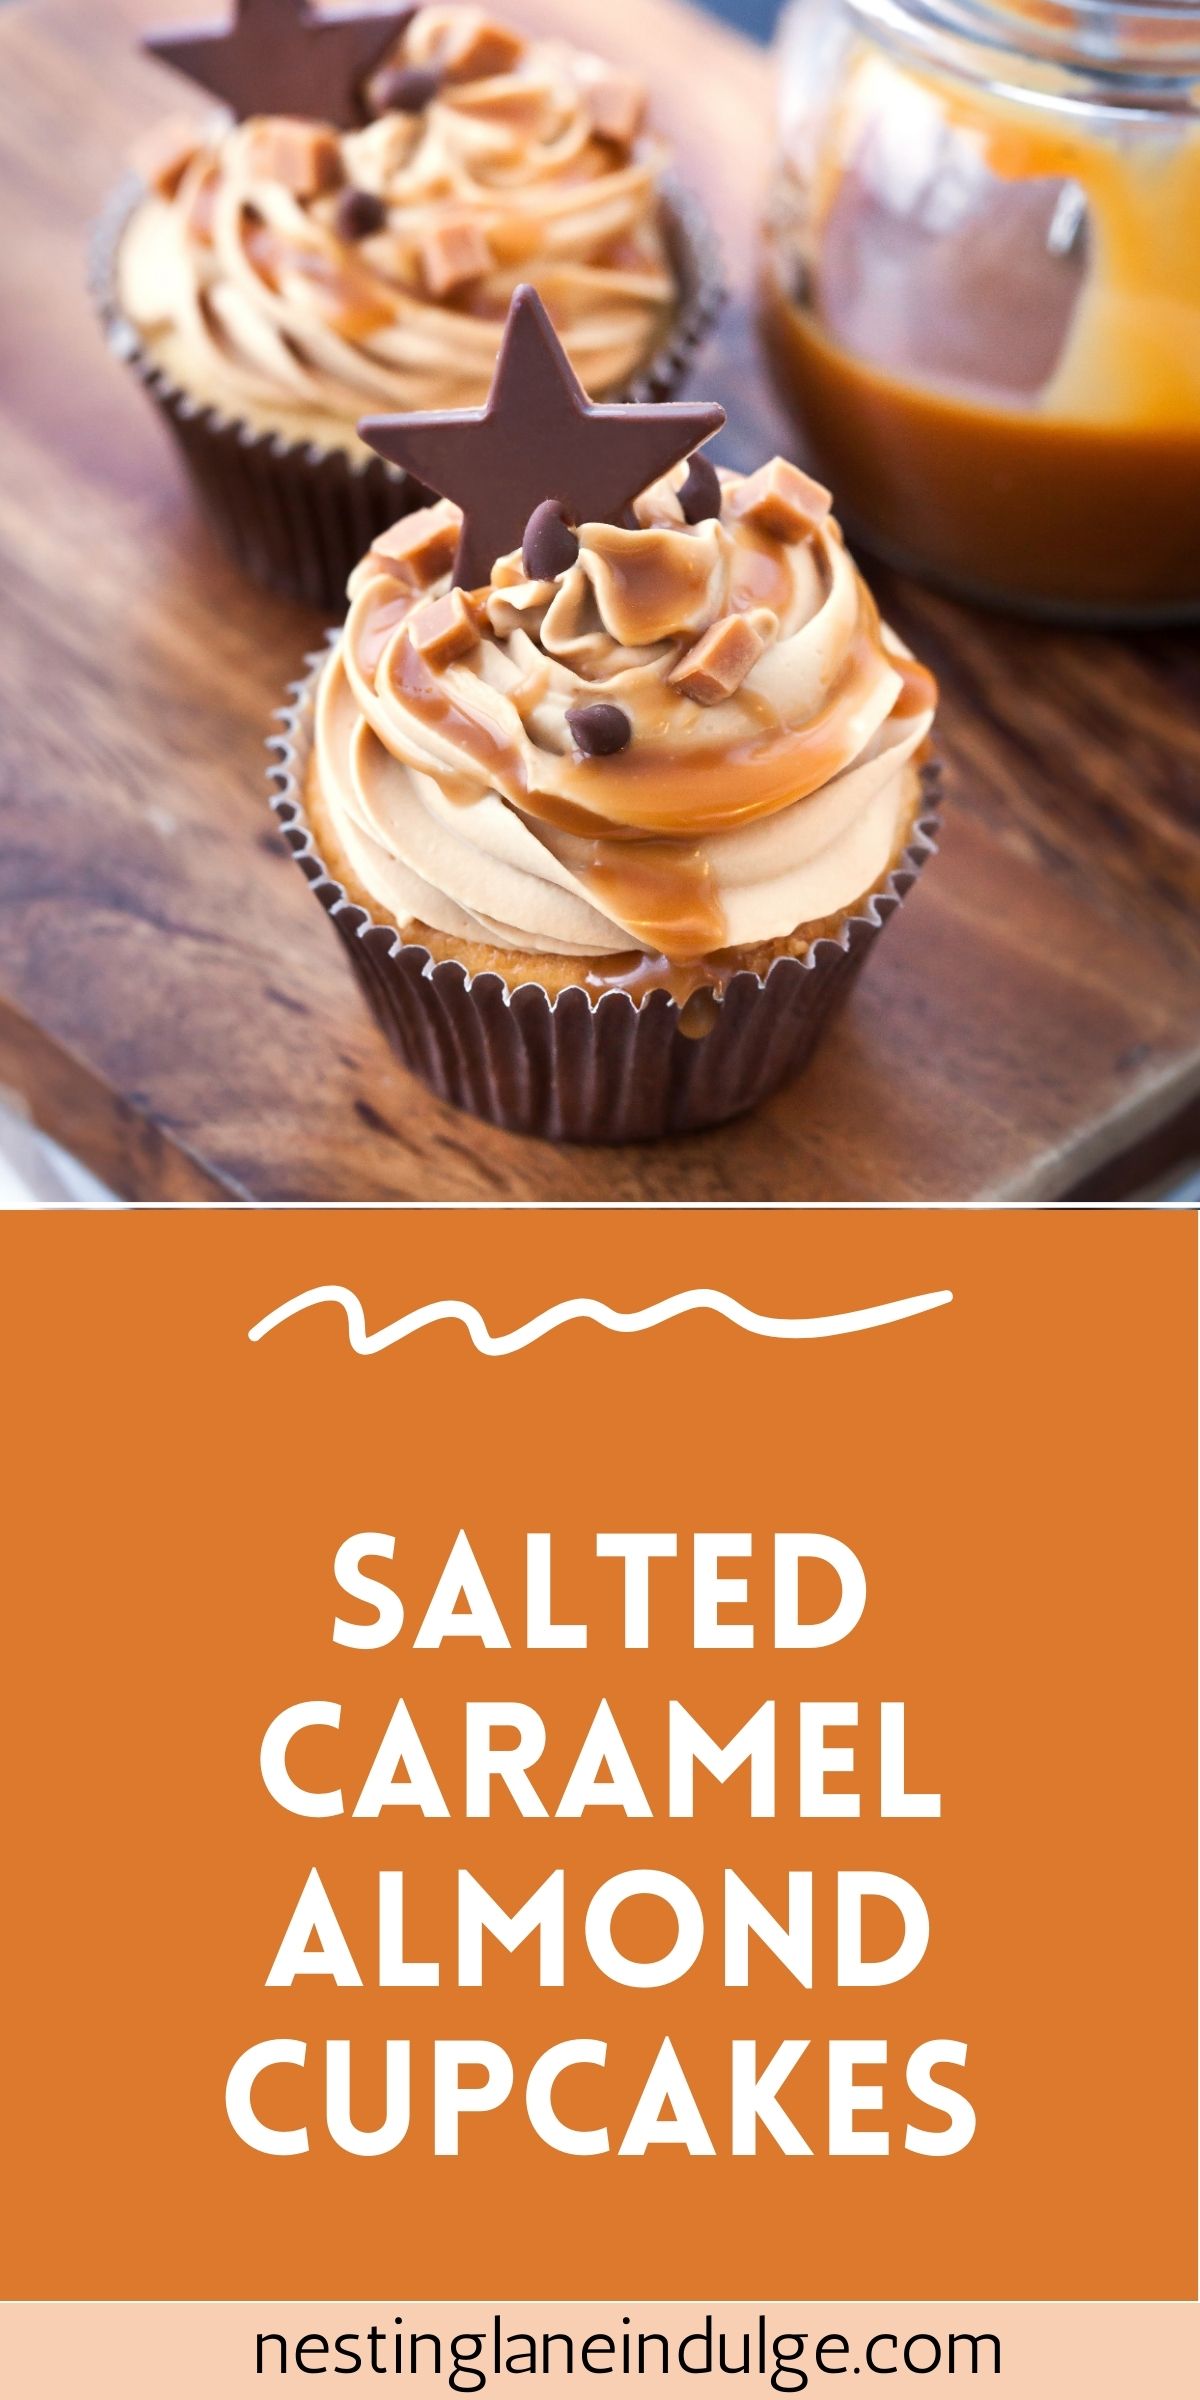 Graphic for Pinterest of Salted Caramel Almond Cupcakes Recipe.